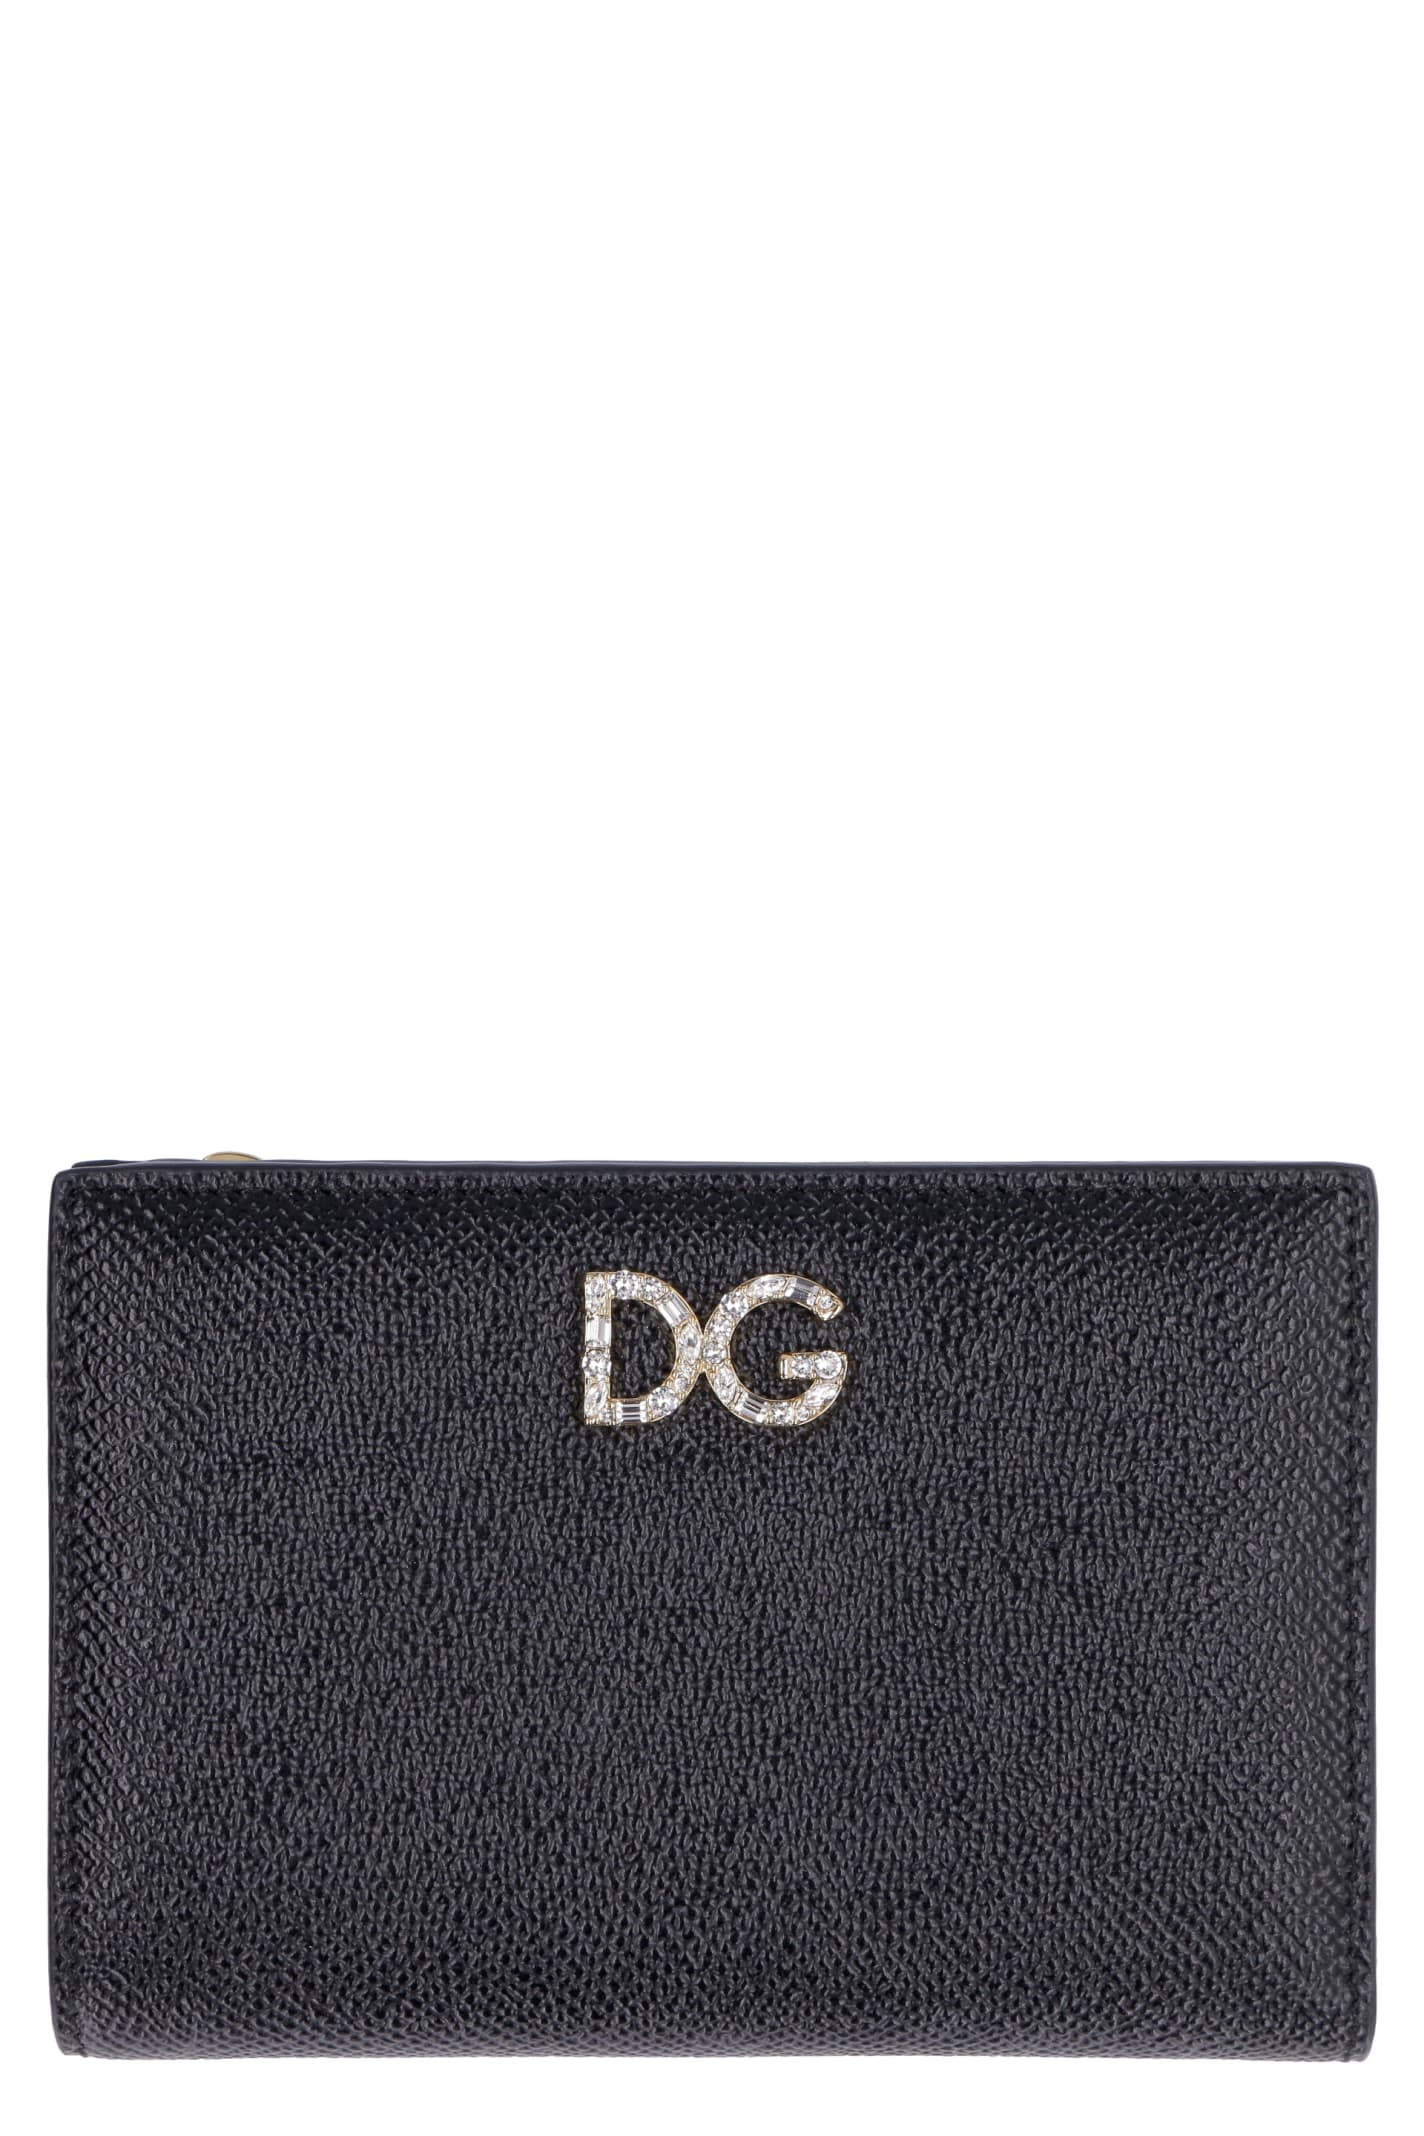 Dolce & Gabbana Dauphine-print Leather Wallet